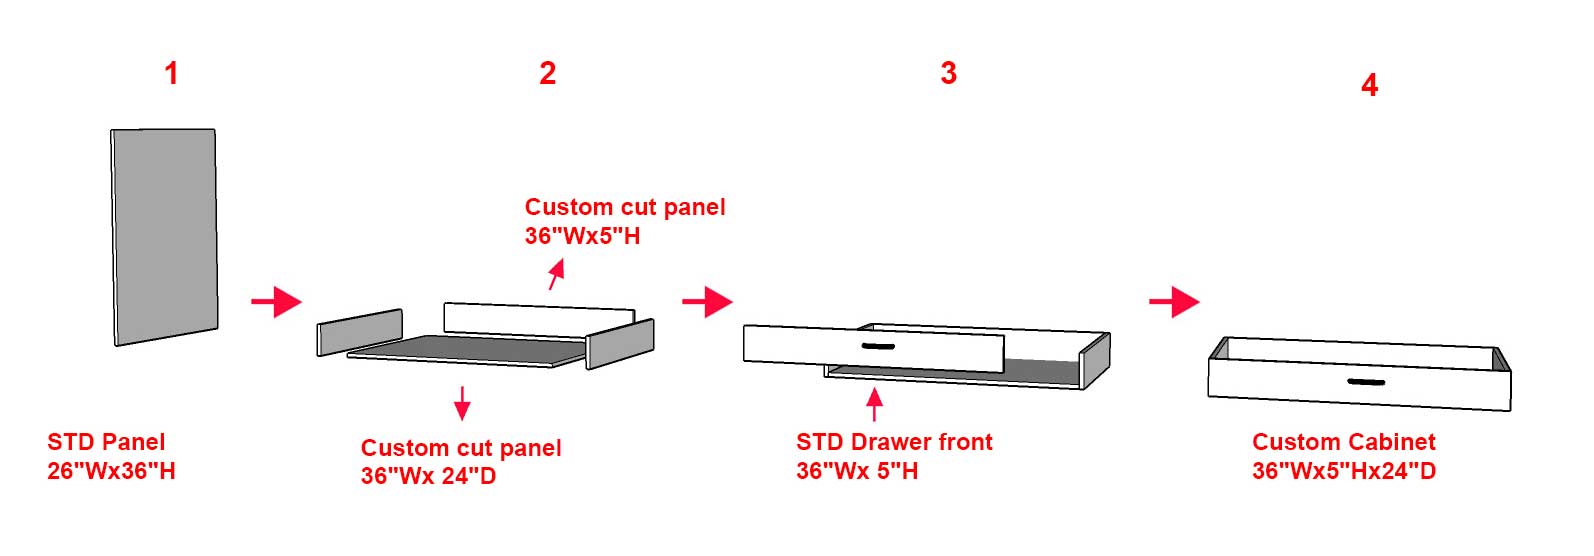 image showing how to make a 5” drawer from a 26”W x 36”H IKEA panel